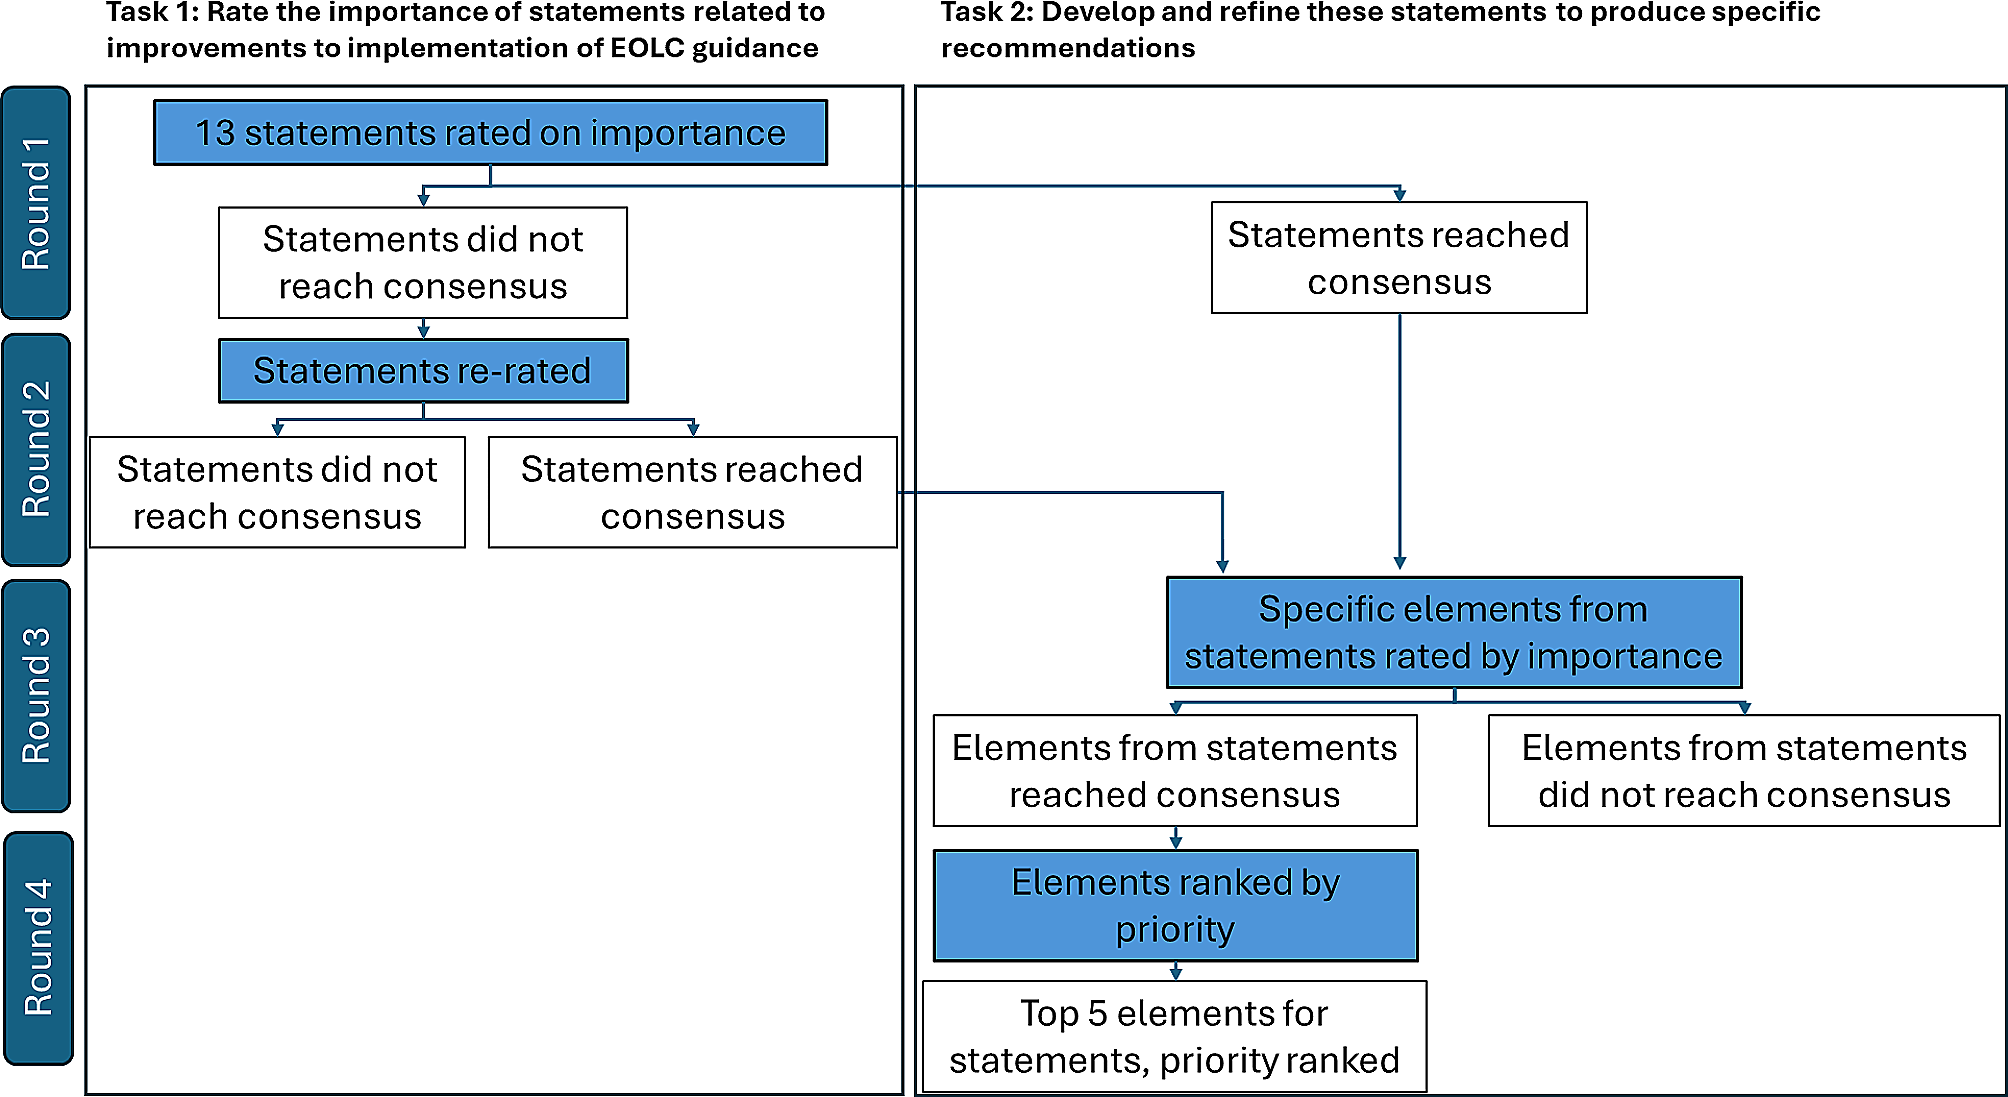 Consensus-building to improve implementation of NICE guidance on planning for end-of-life treatment and care: a mixed-methods study